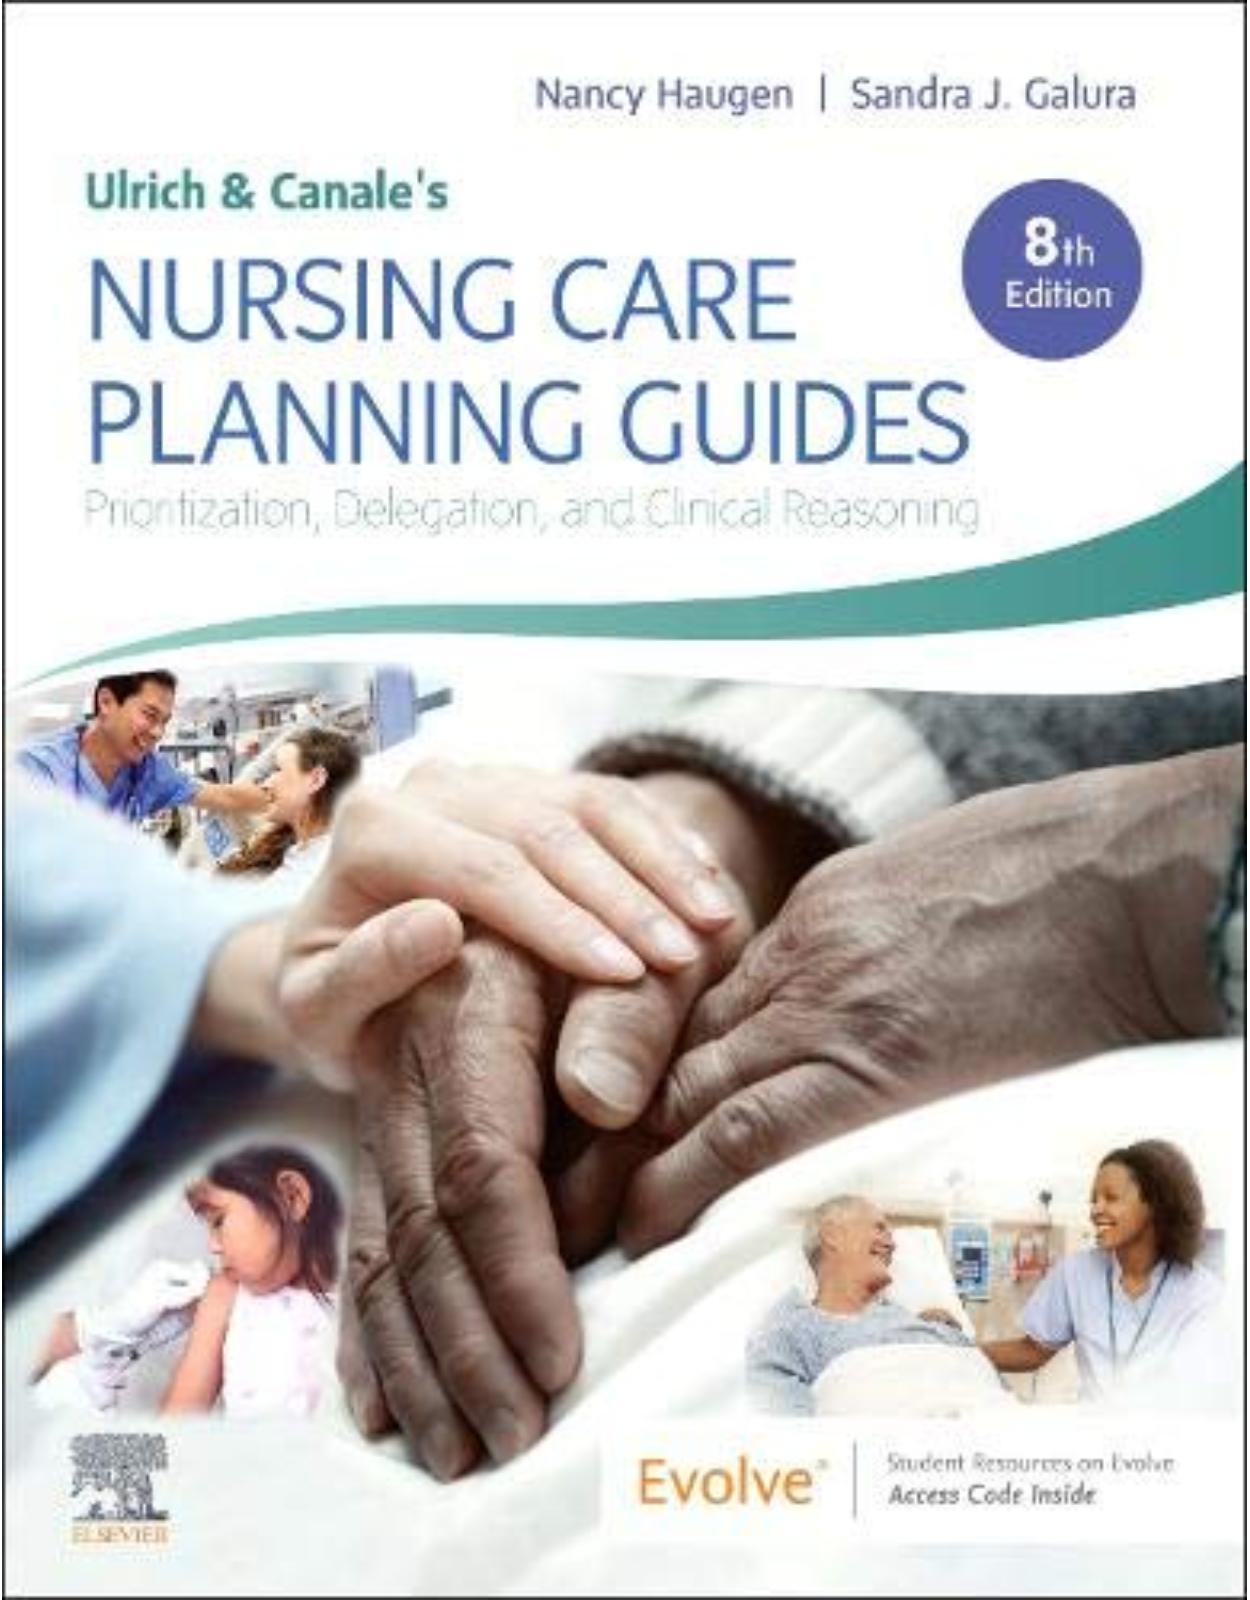 Ulrich & Canale's Nursing Care Planning Guides: Prioritization, Delegation, and Clinical Reasoning